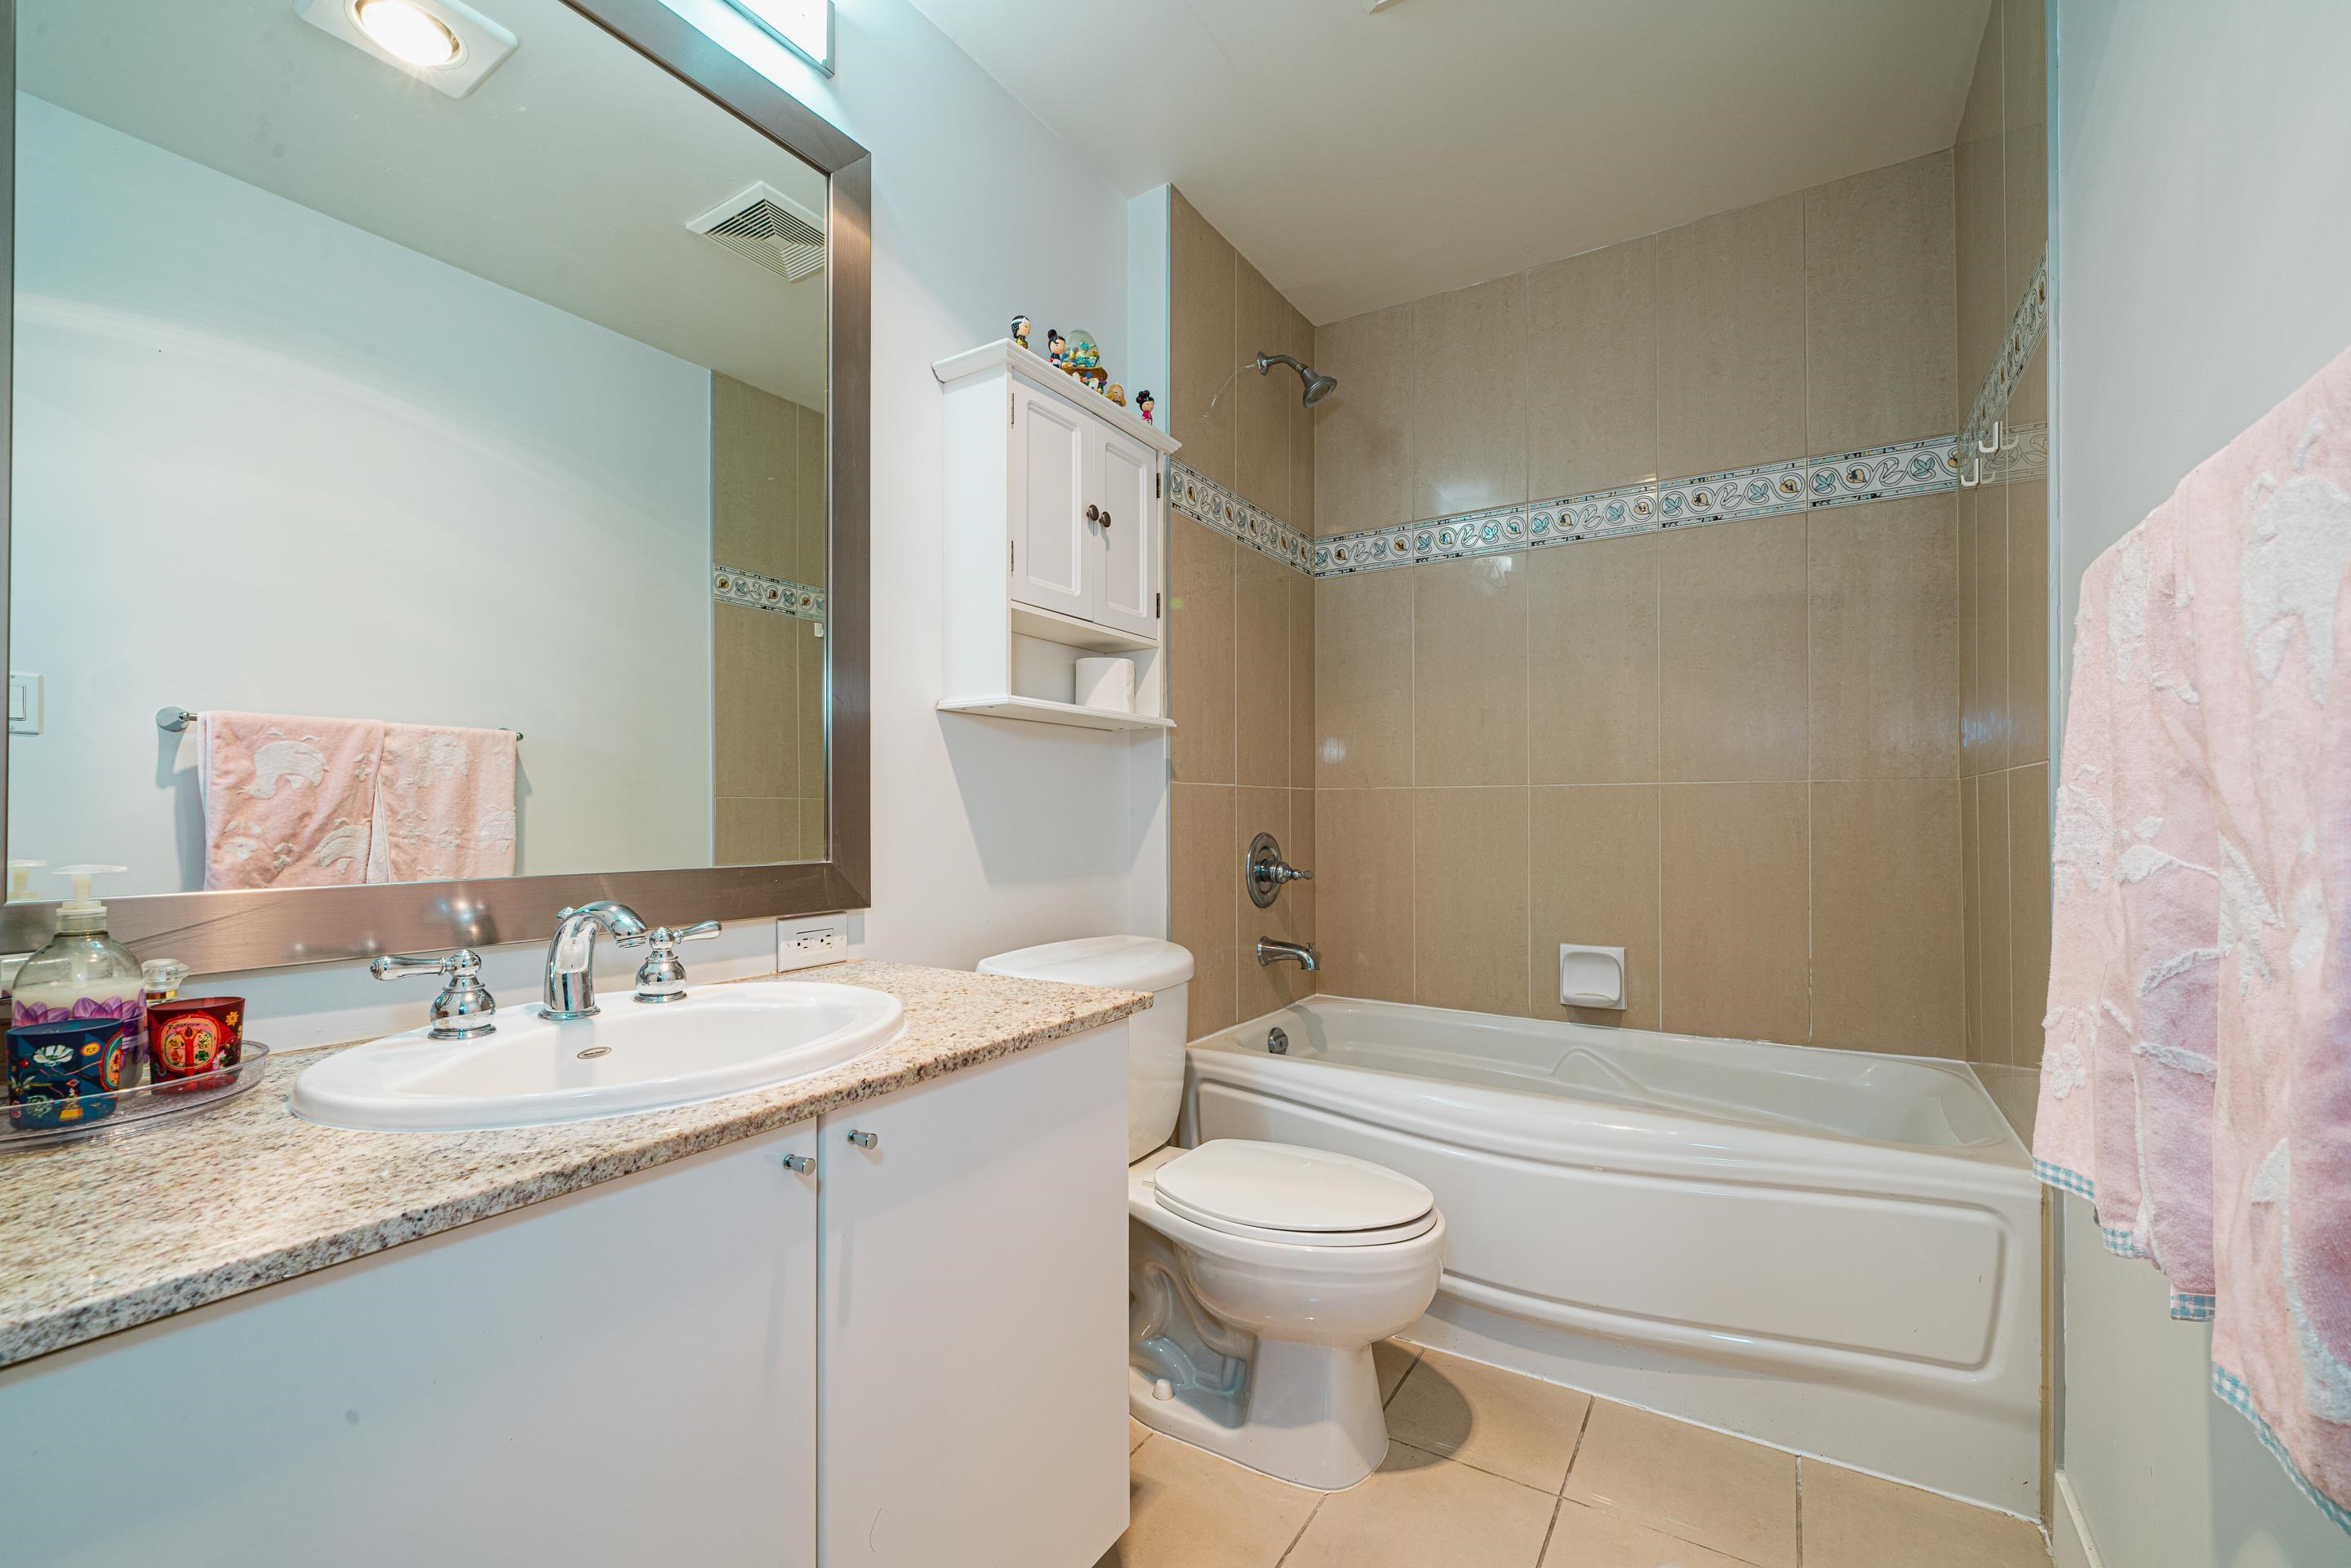 1211 MELVILLE, Vancouver, British Columbia V6E 0A7, 3 Bedrooms Bedrooms, ,2 BathroomsBathrooms,Residential Attached,For Sale,MELVILLE,R2852176